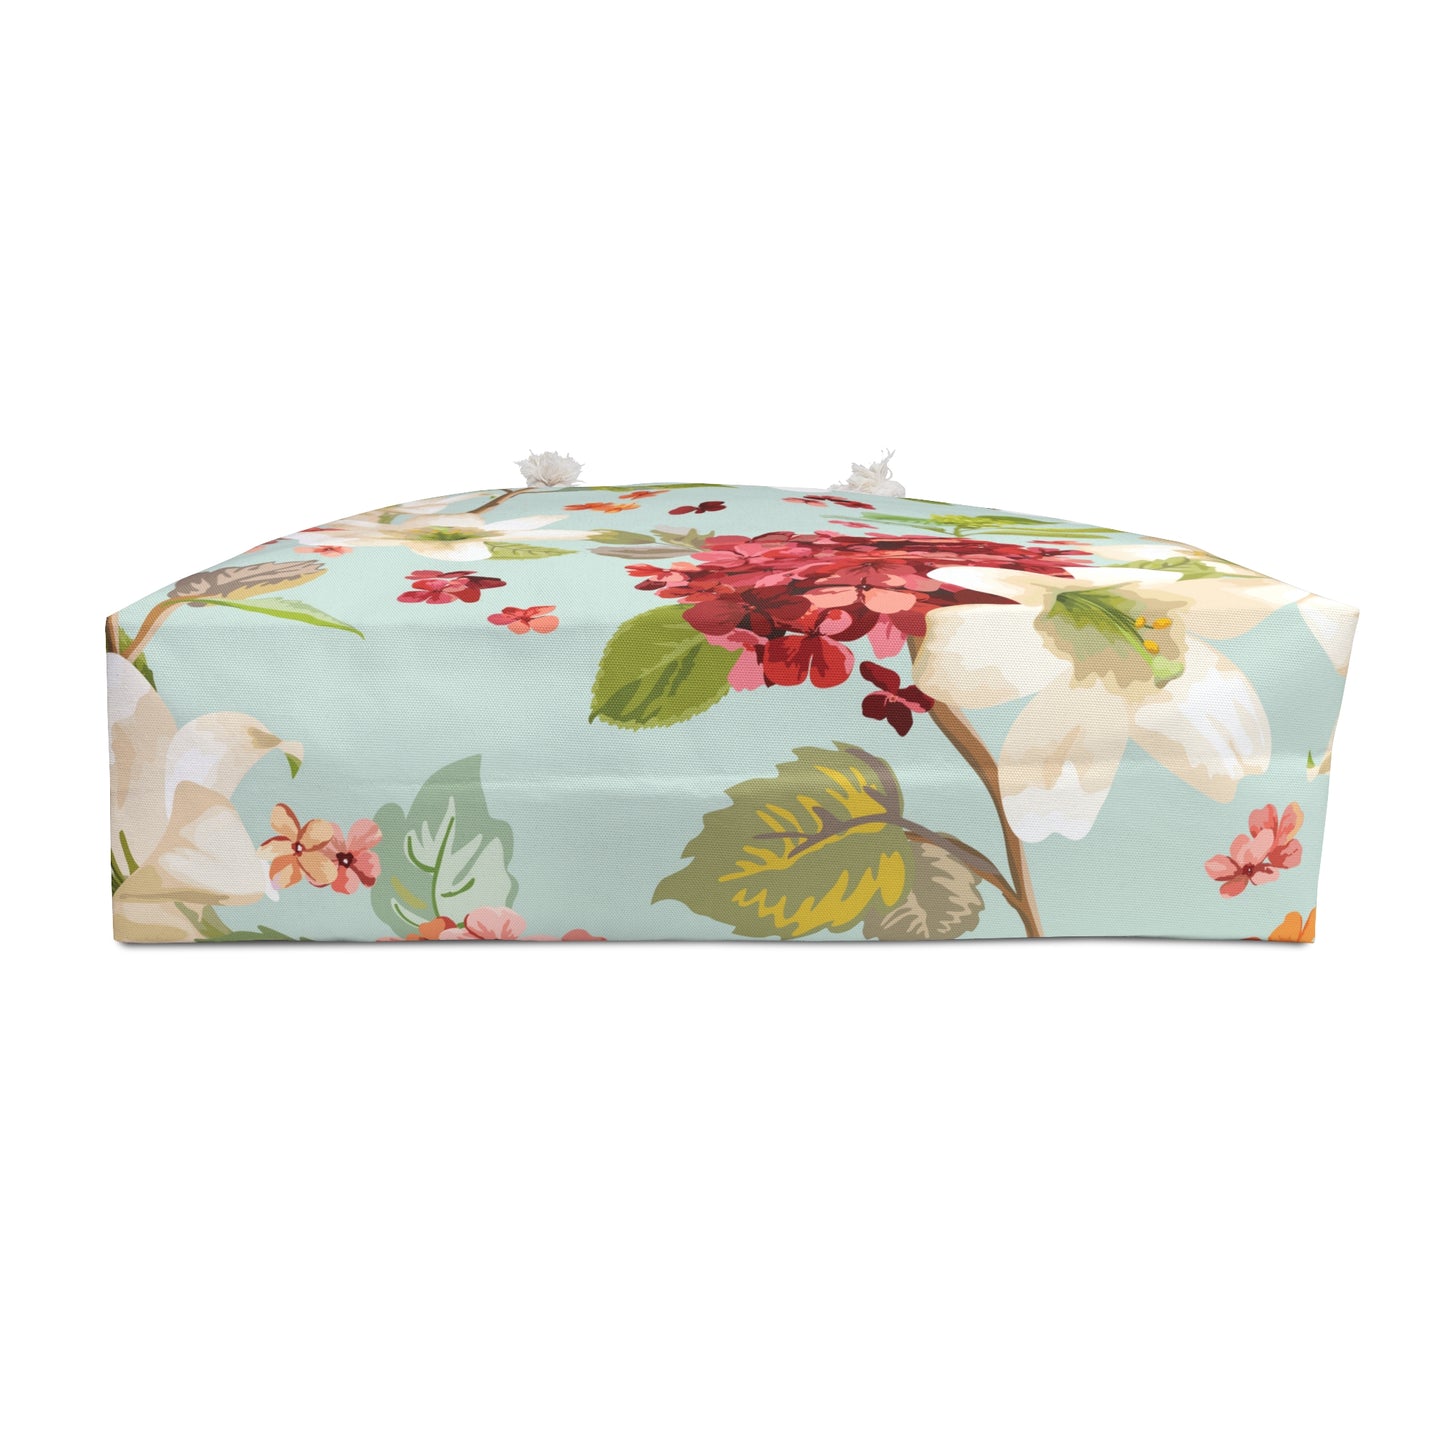 Autumn Hortensia and Lily Flowers Weekender Bag